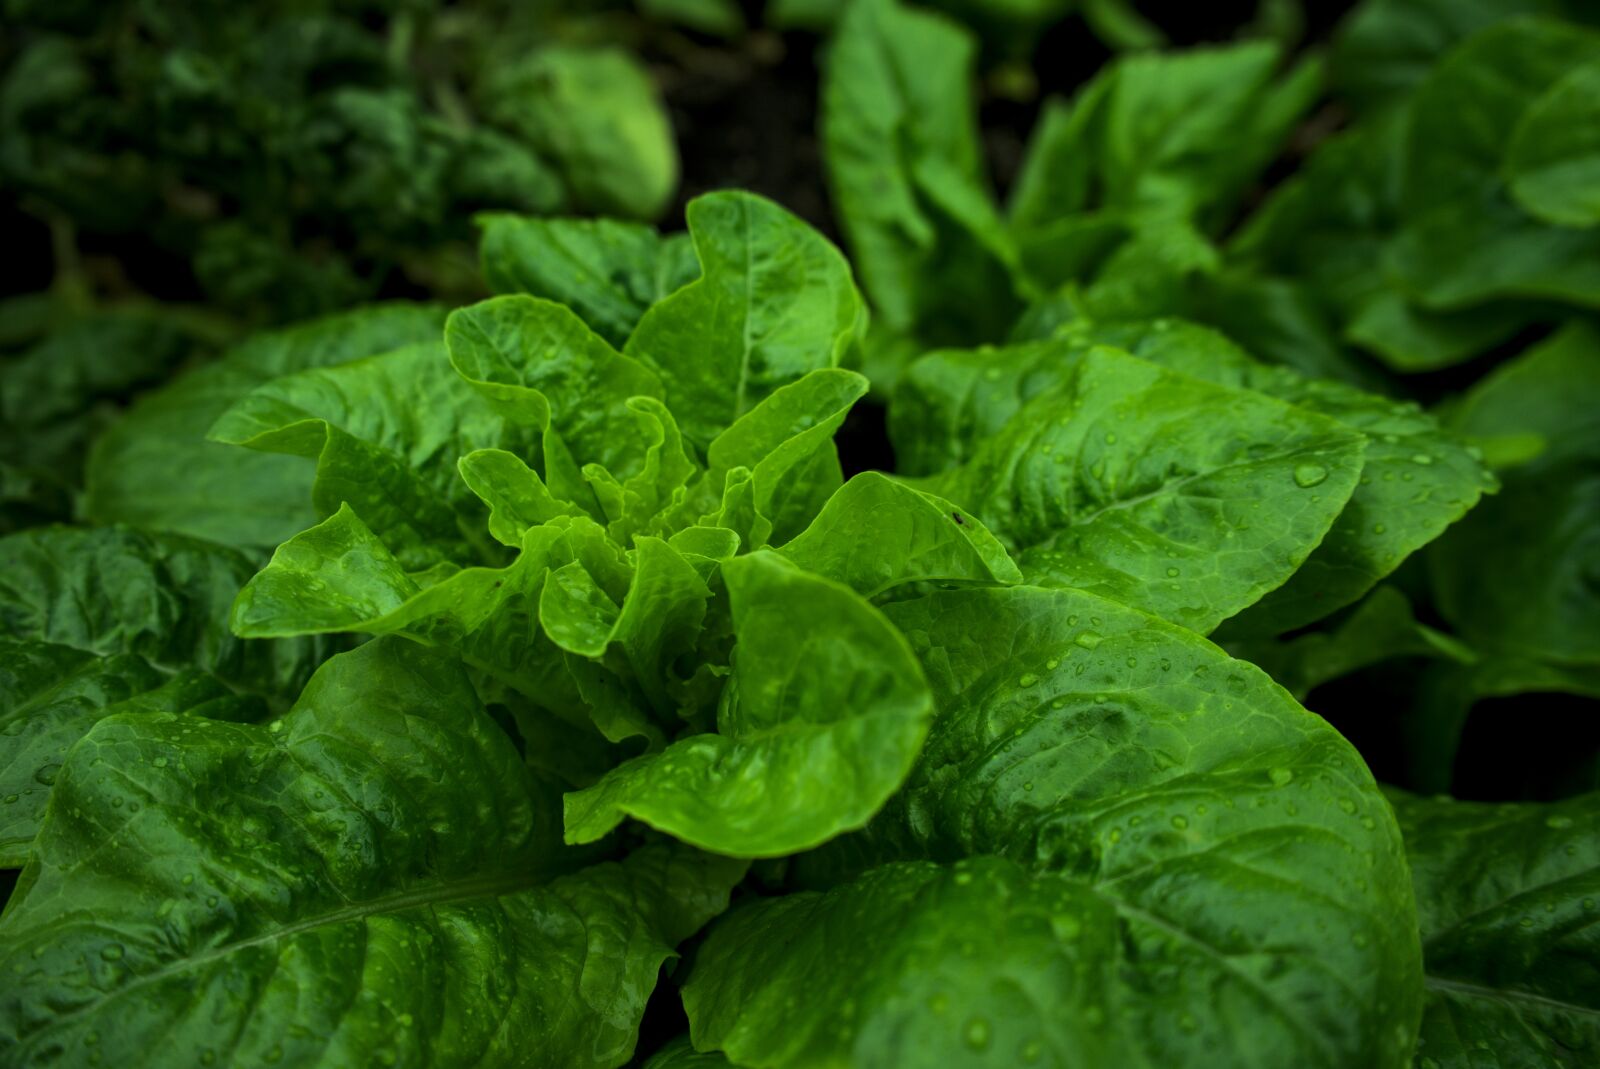 Sony a7 sample photo. Salad, green, leaves photography